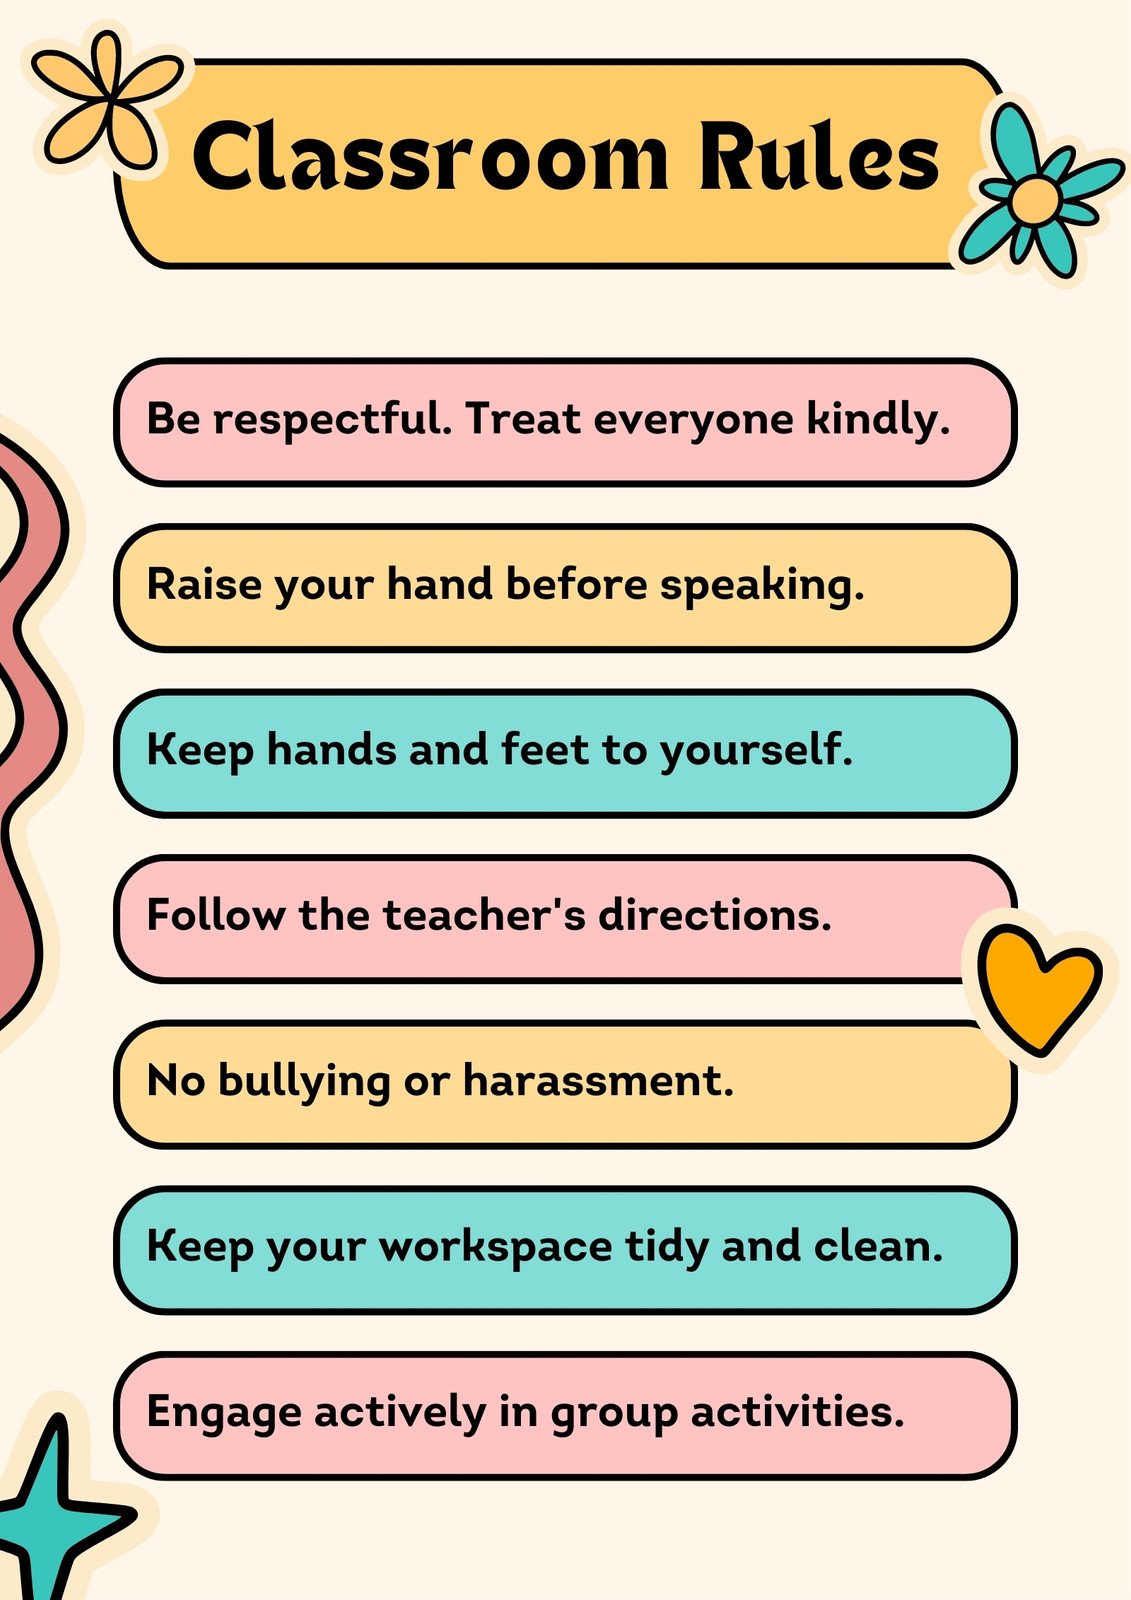 Classroom Rules Poster in Yellow Blue and Pink Retro Style